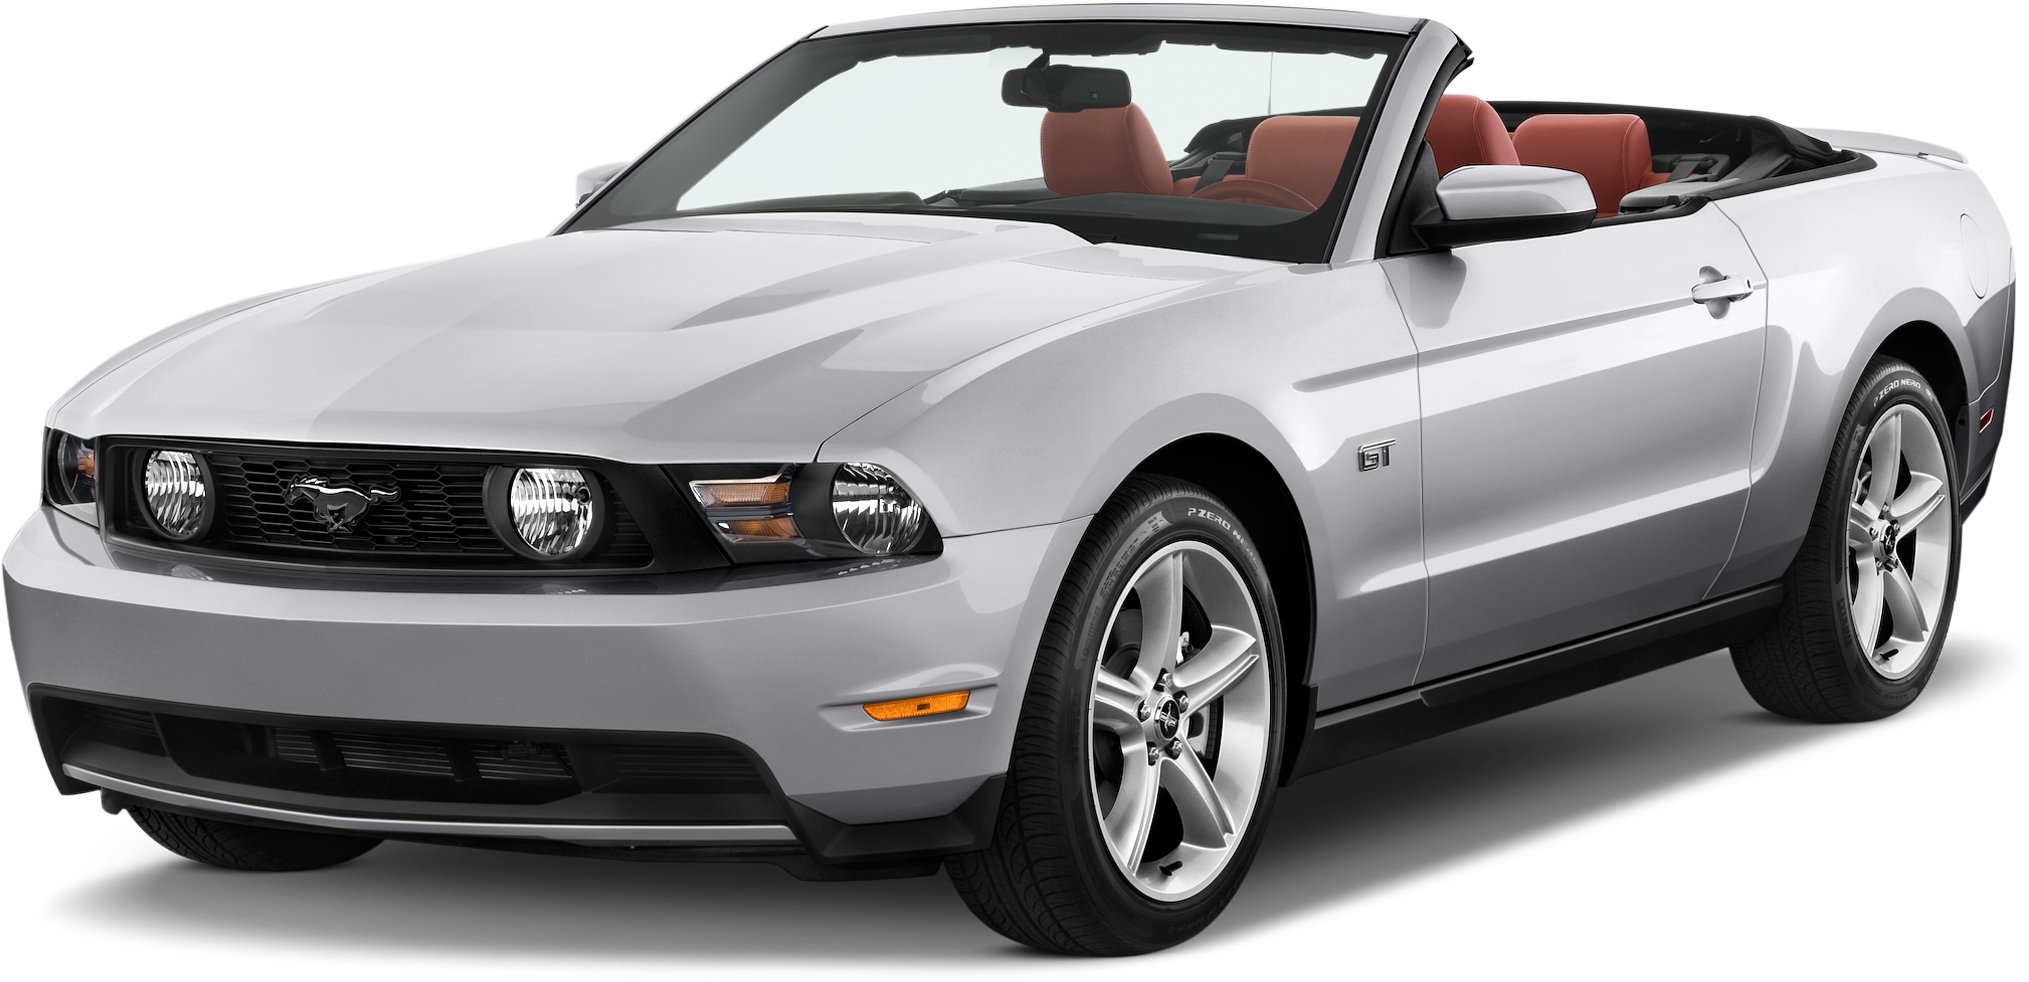 Silver Ford Mustang G T Convertible